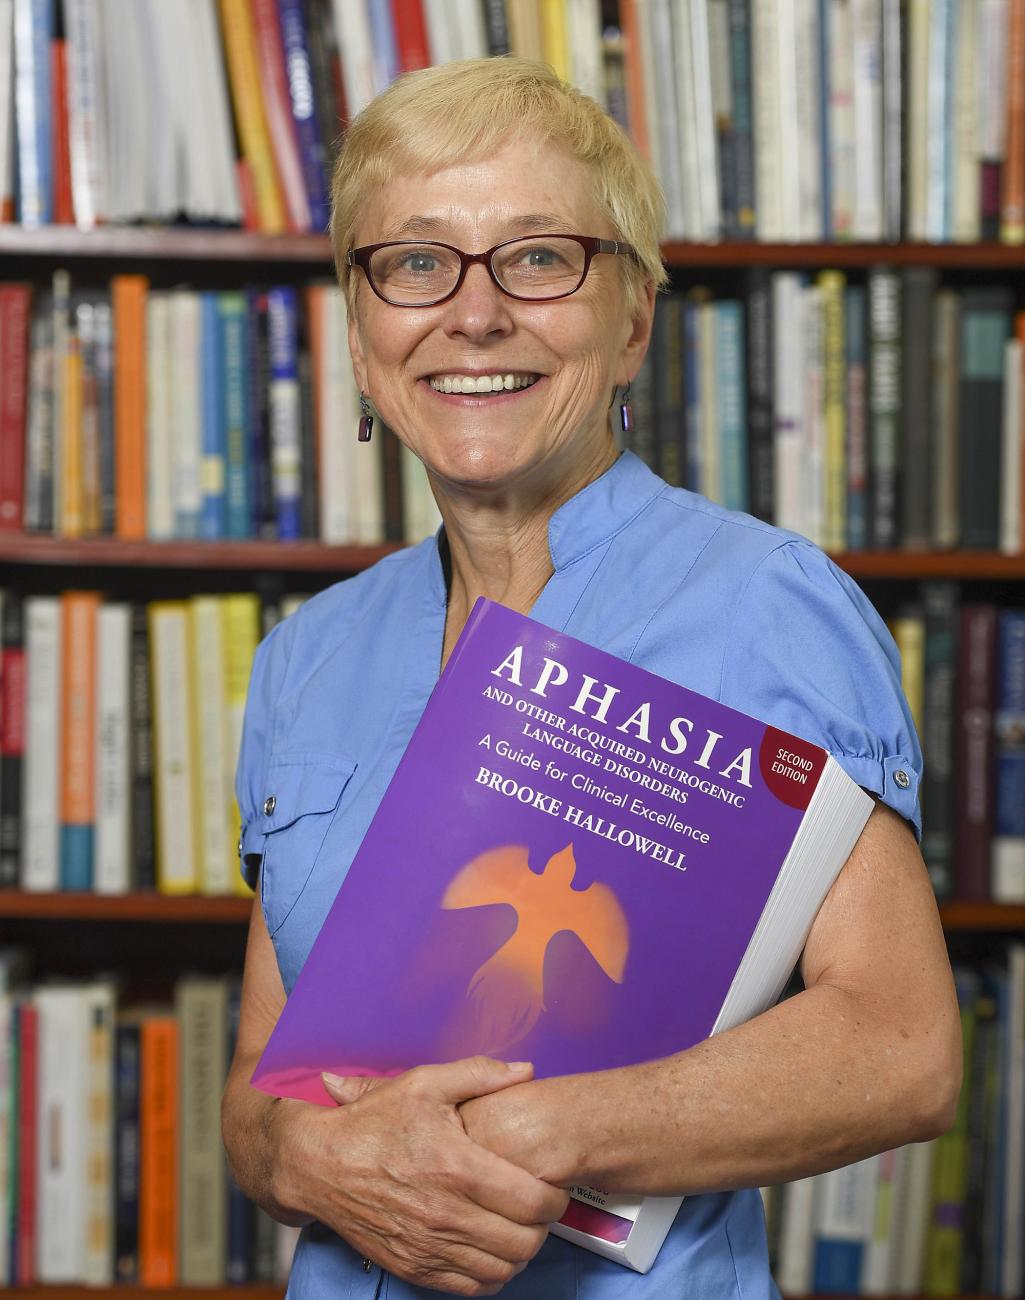 A new book authored by Brooke Hallowell, PhD, Springfield College dean of the School of Health Sciences, is bringing important attention to aphasia, a little-known, but very common disorder.